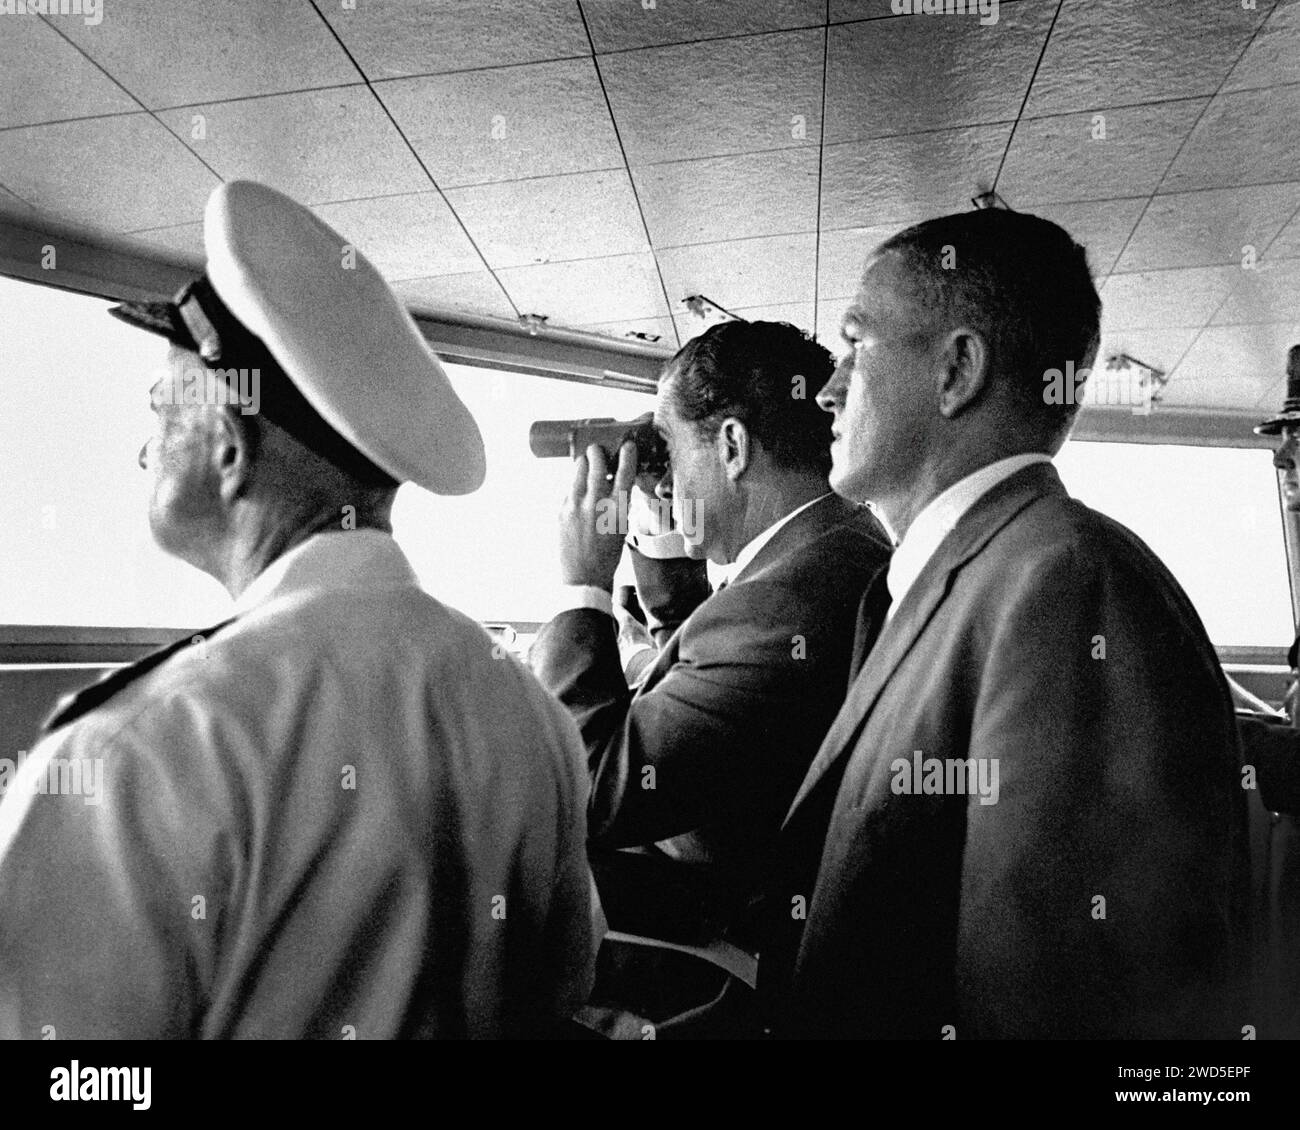 U.S. President Richard M. Nixon aboard U.S.S. Hornet aircraft carrier, used binoculars to watch the Apollo 11 Lunar Mission Recovery of astronauts, Neil A. Armstrong, Edwin E. Aldrin and  Michael Collins, approximately 812 nautical miles southwest of Hawaii, NASA, July 24, 1969 Stock Photo